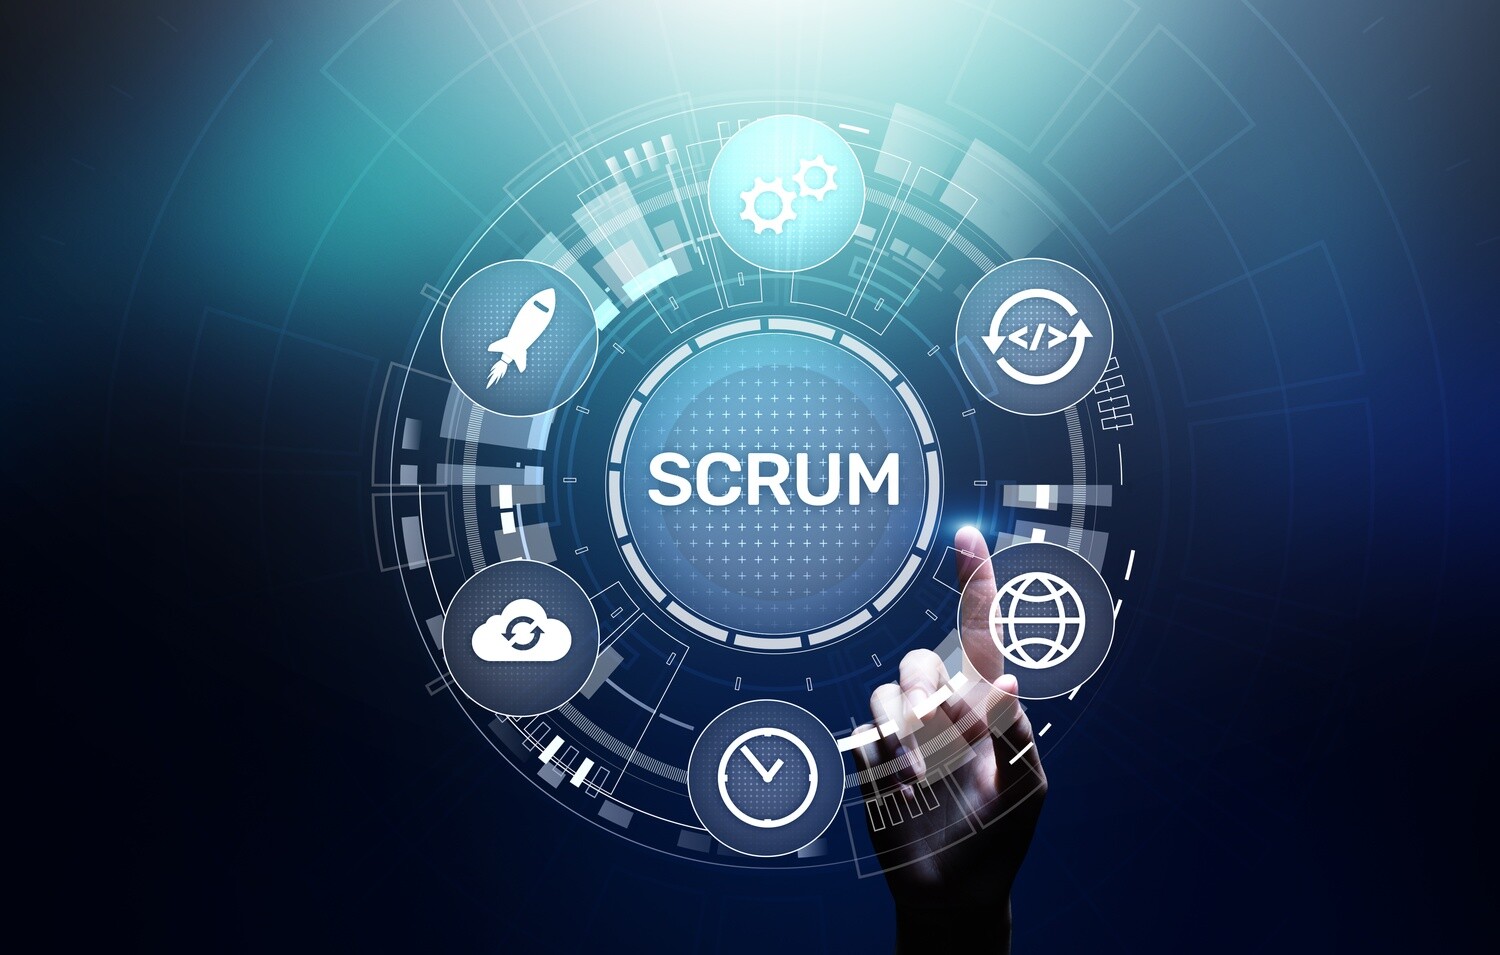 Scrum Agile Master Certified (SAMC)™ –
3 Days, 21 PDUs - Self-Paced E-Learning Class (Also available with an Instructor)